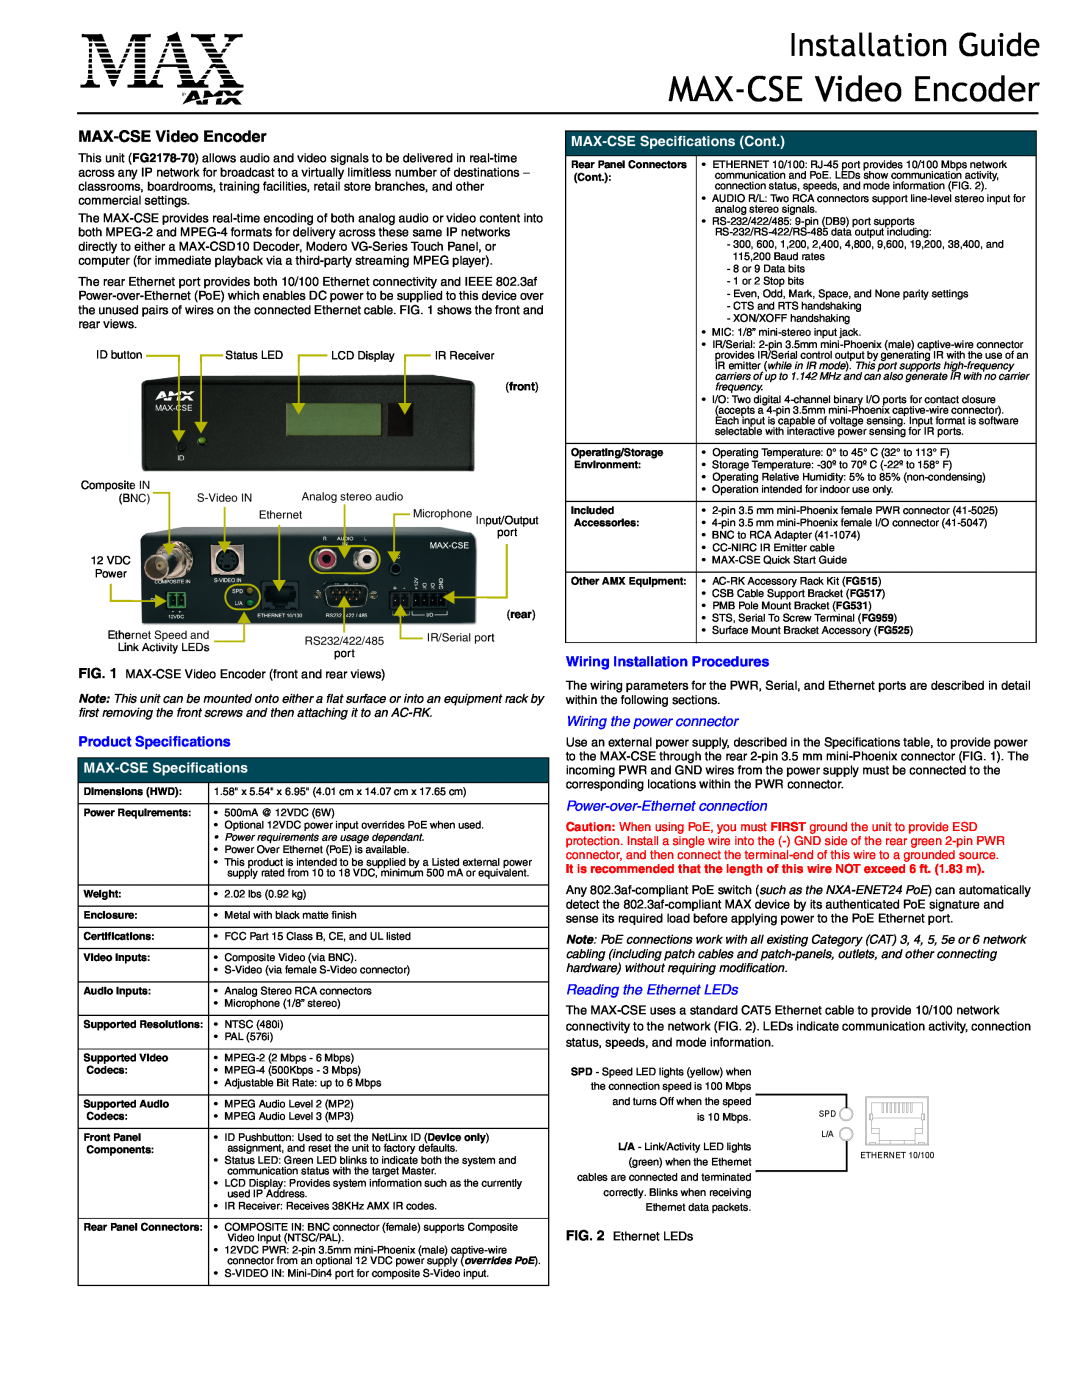 AMX specifications MAX-CSEVideo Encoder, MAX-CSESpecifications Cont, Wiring Installation Procedures, Installation Guide 